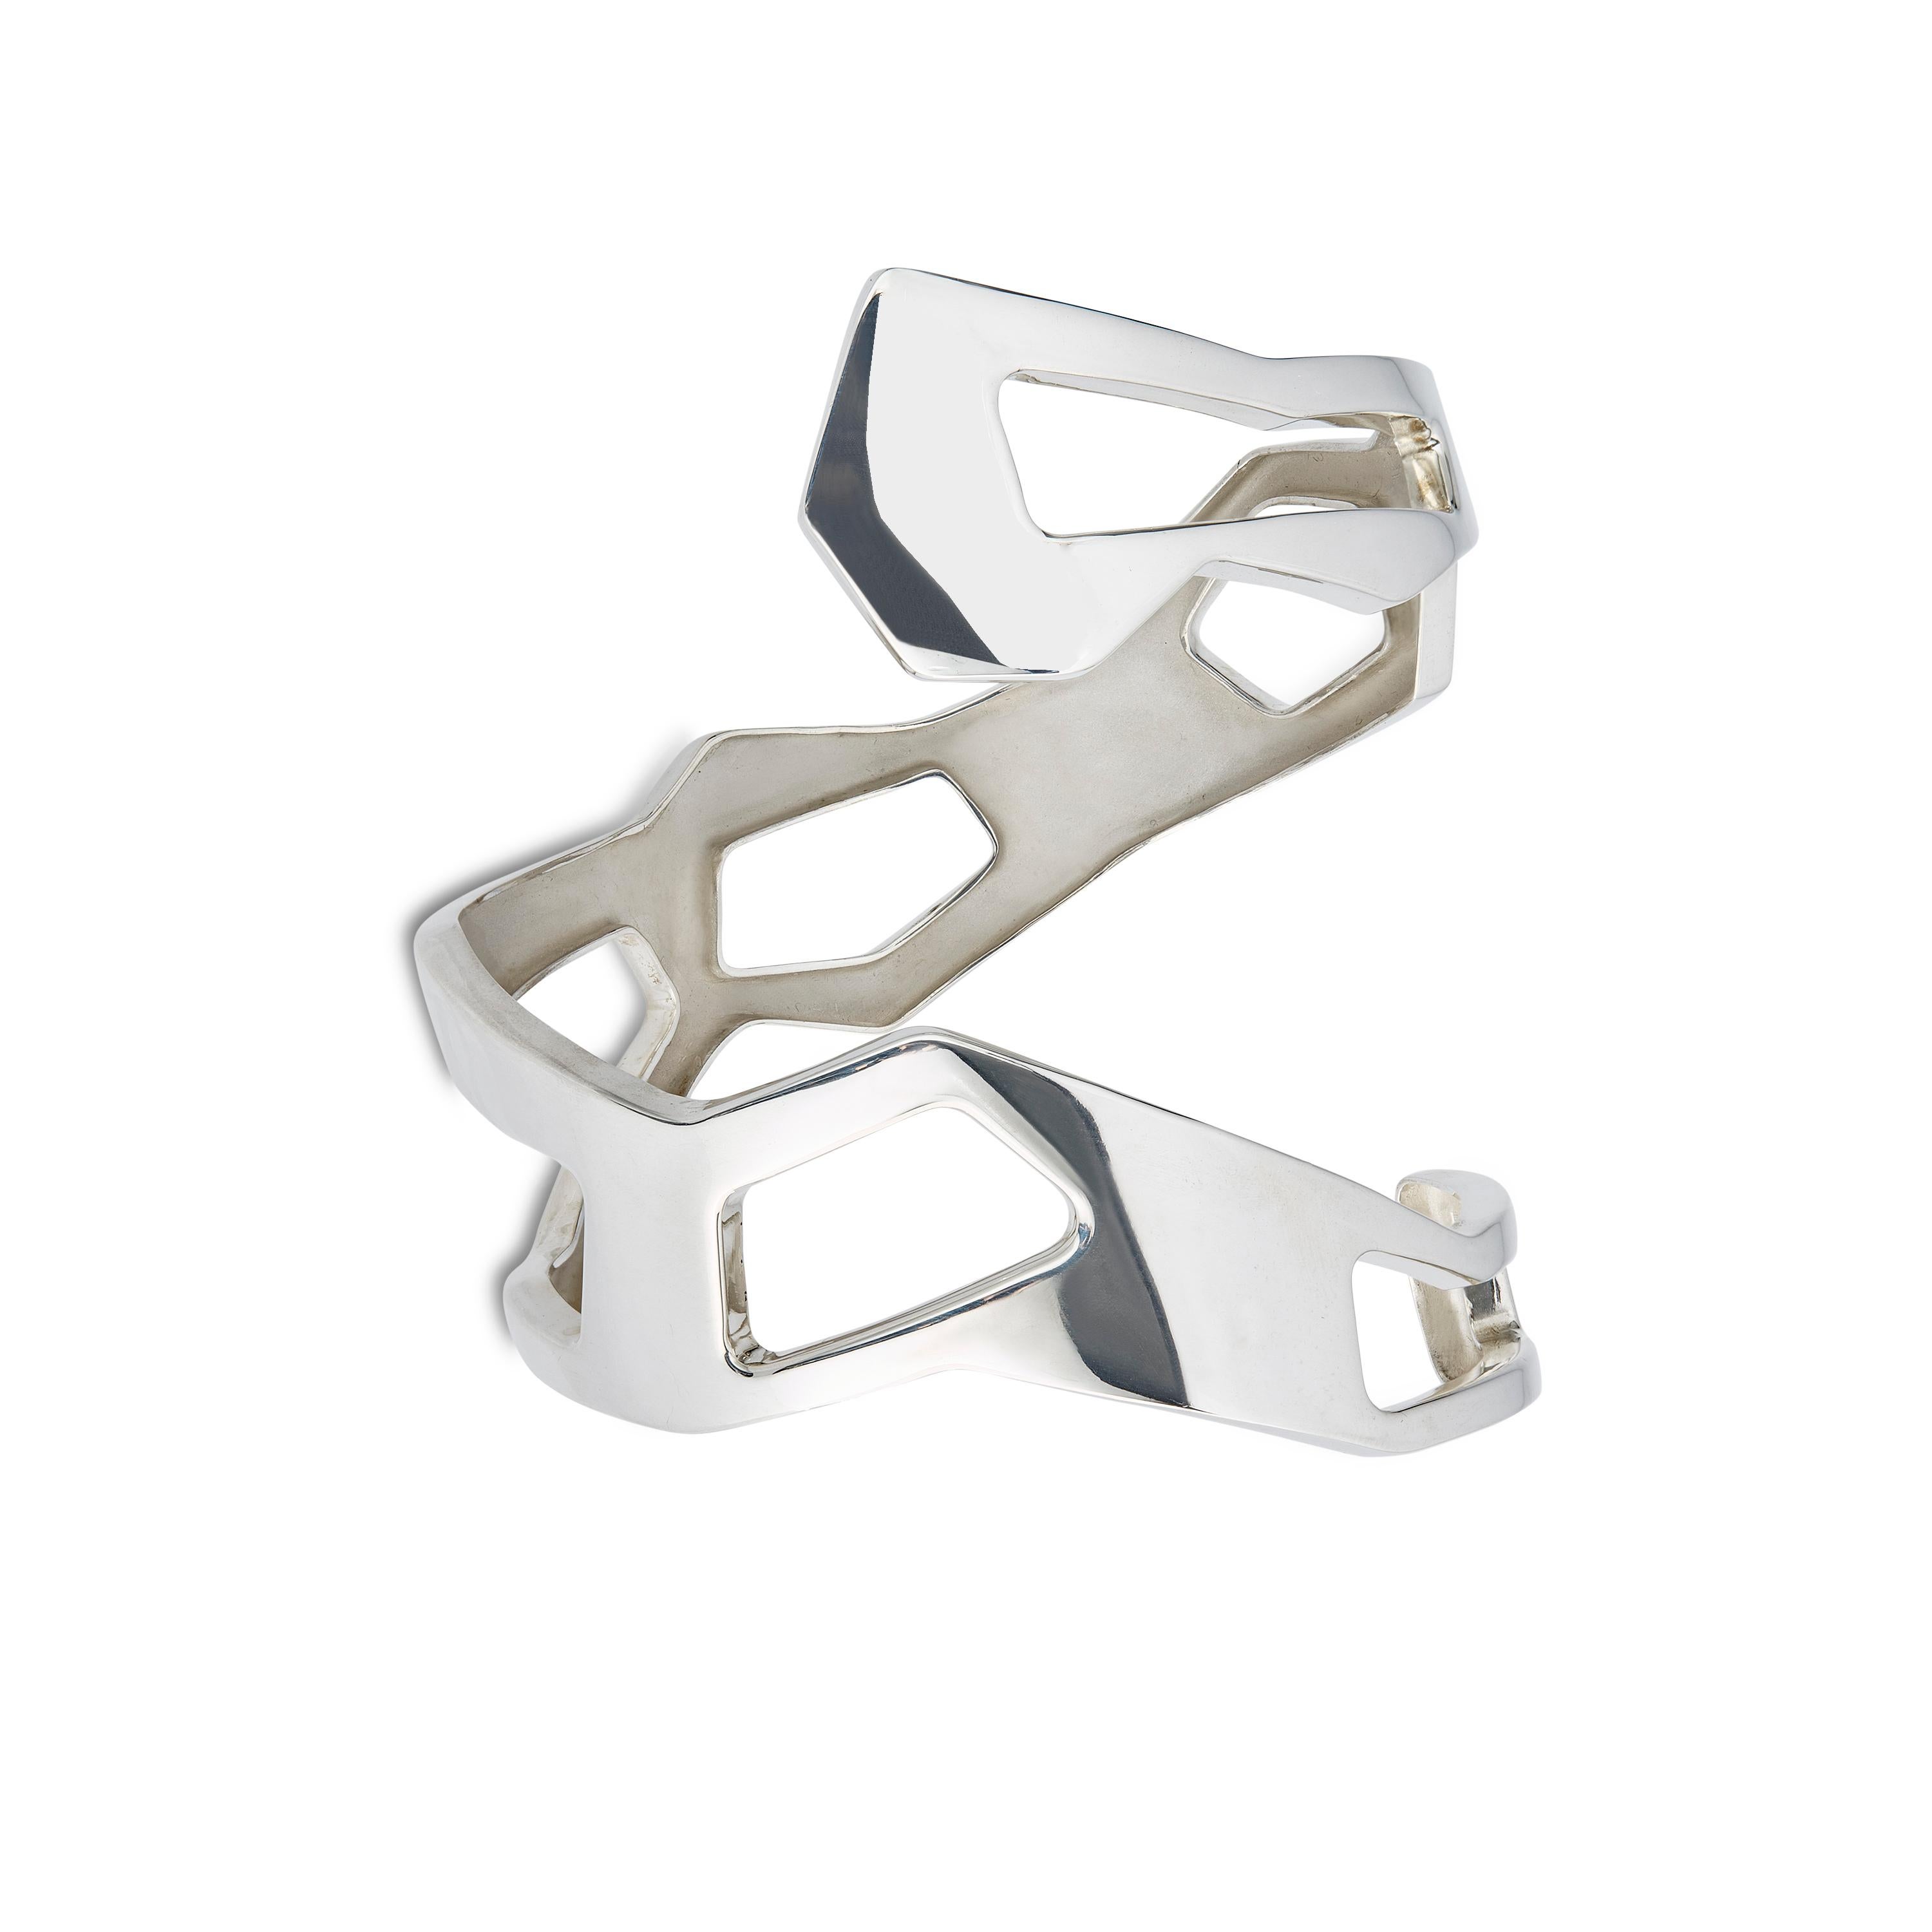 The infinitely varied and naturally beautiful configurations of drifting ice floes inspire the angular shapes of the Borealis Slim Cuff. Composed of light hollow geometric volumes with rounded edges, this contemporary and timeless sterling silver